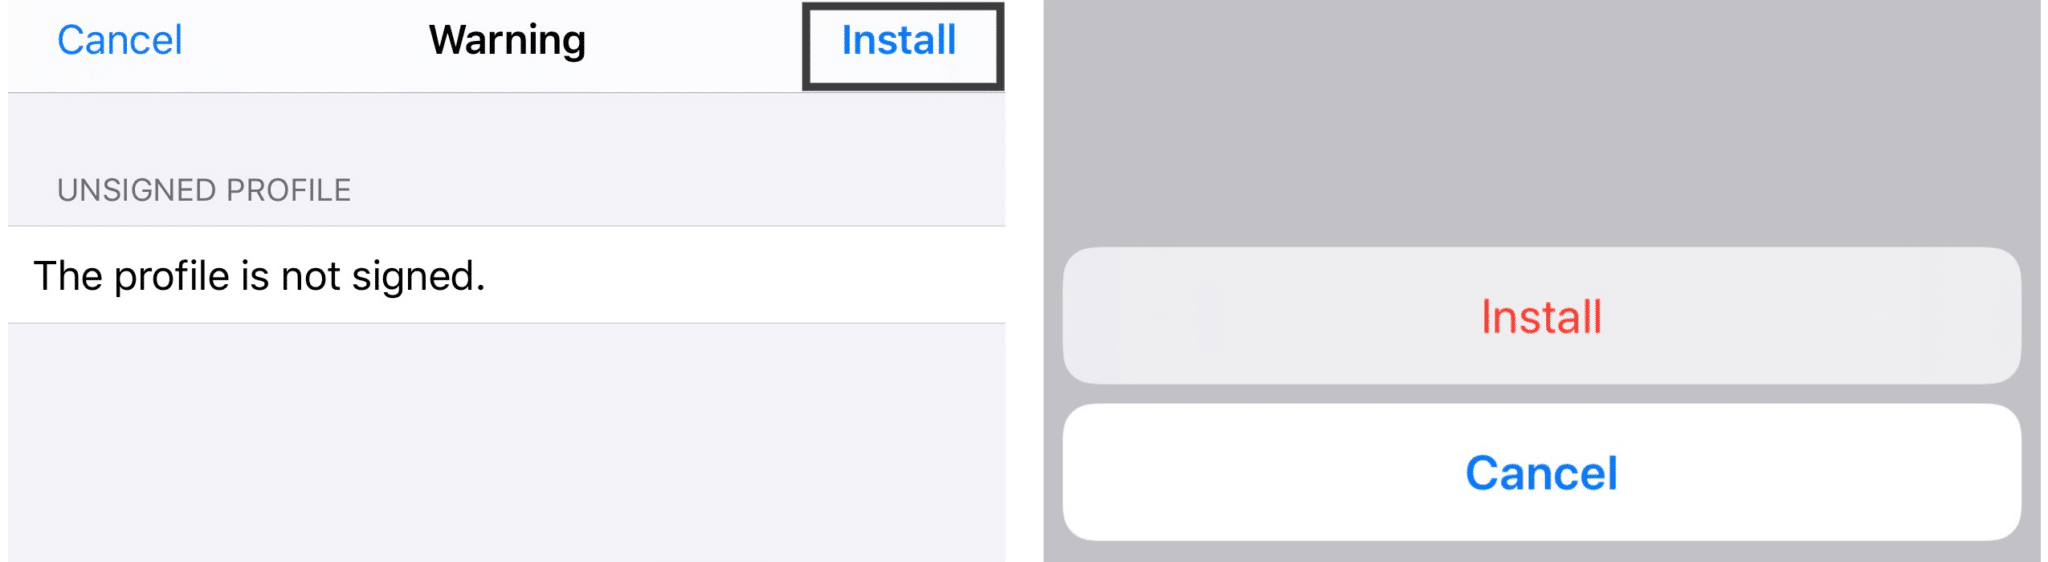 Installing or adding Fonts on IOS 13 from Safari